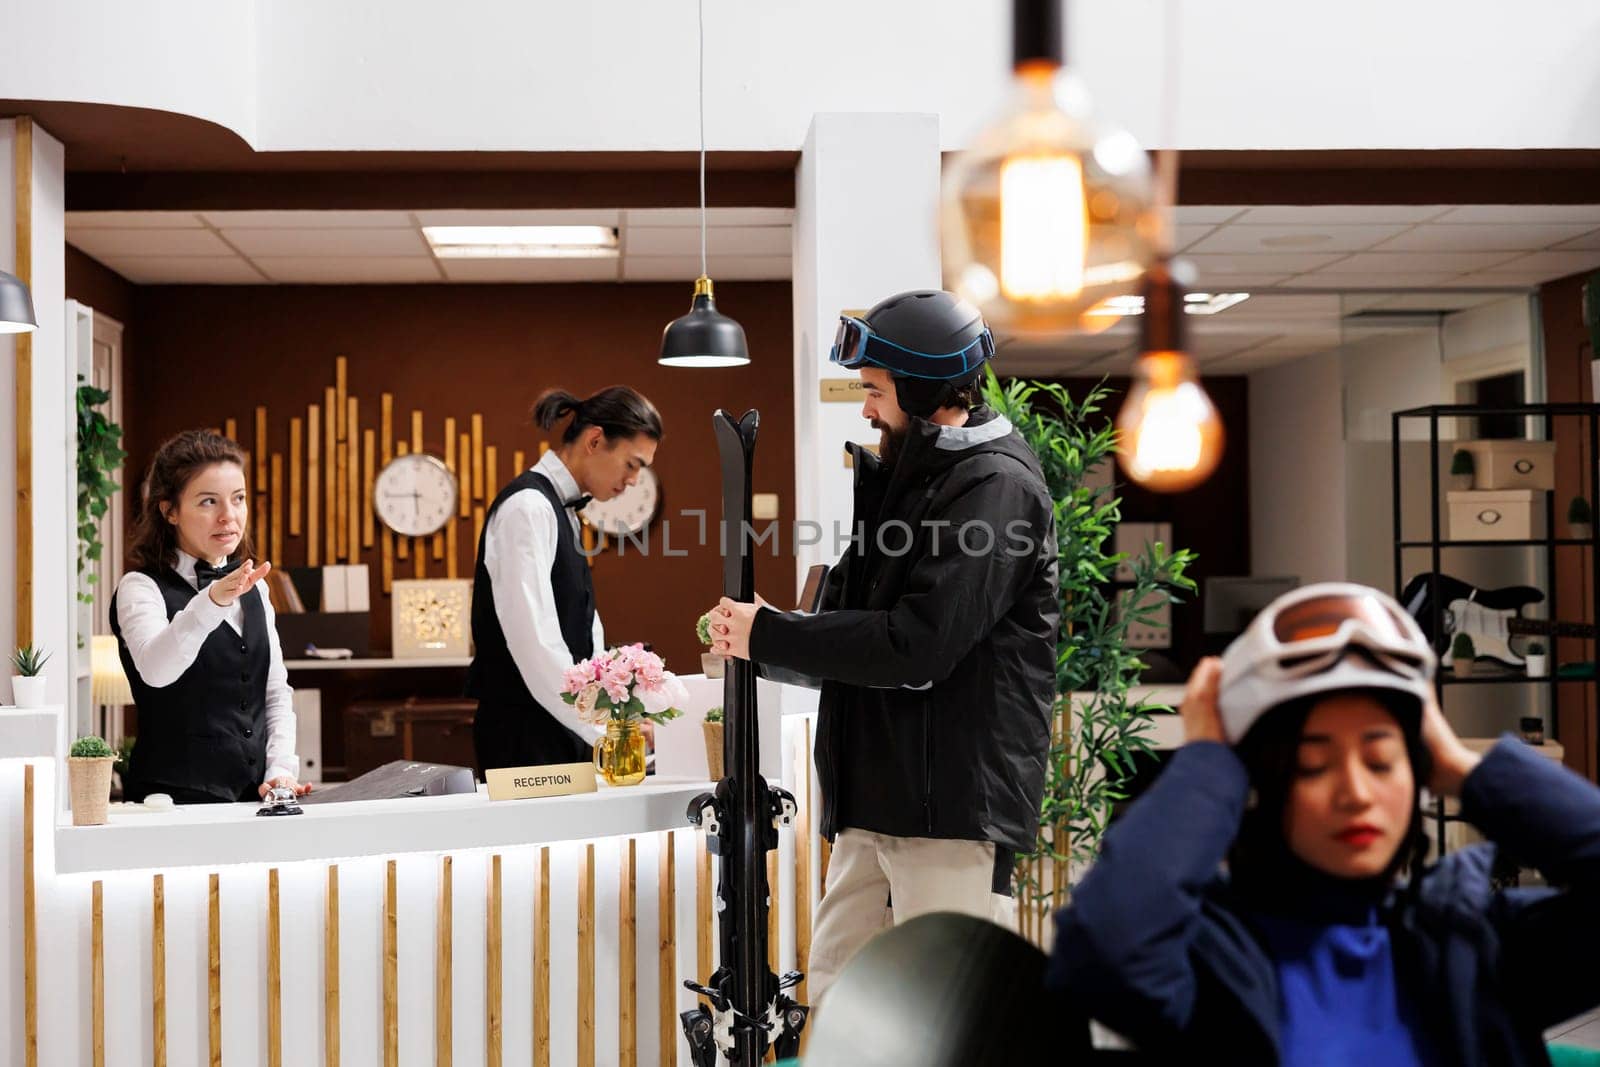 Female guest with helmet waits in luxurious lounge area ready for winter vacation at resort. Excitement fills the air as male traveler holding ski equipment checks in at hotel reception front desk.